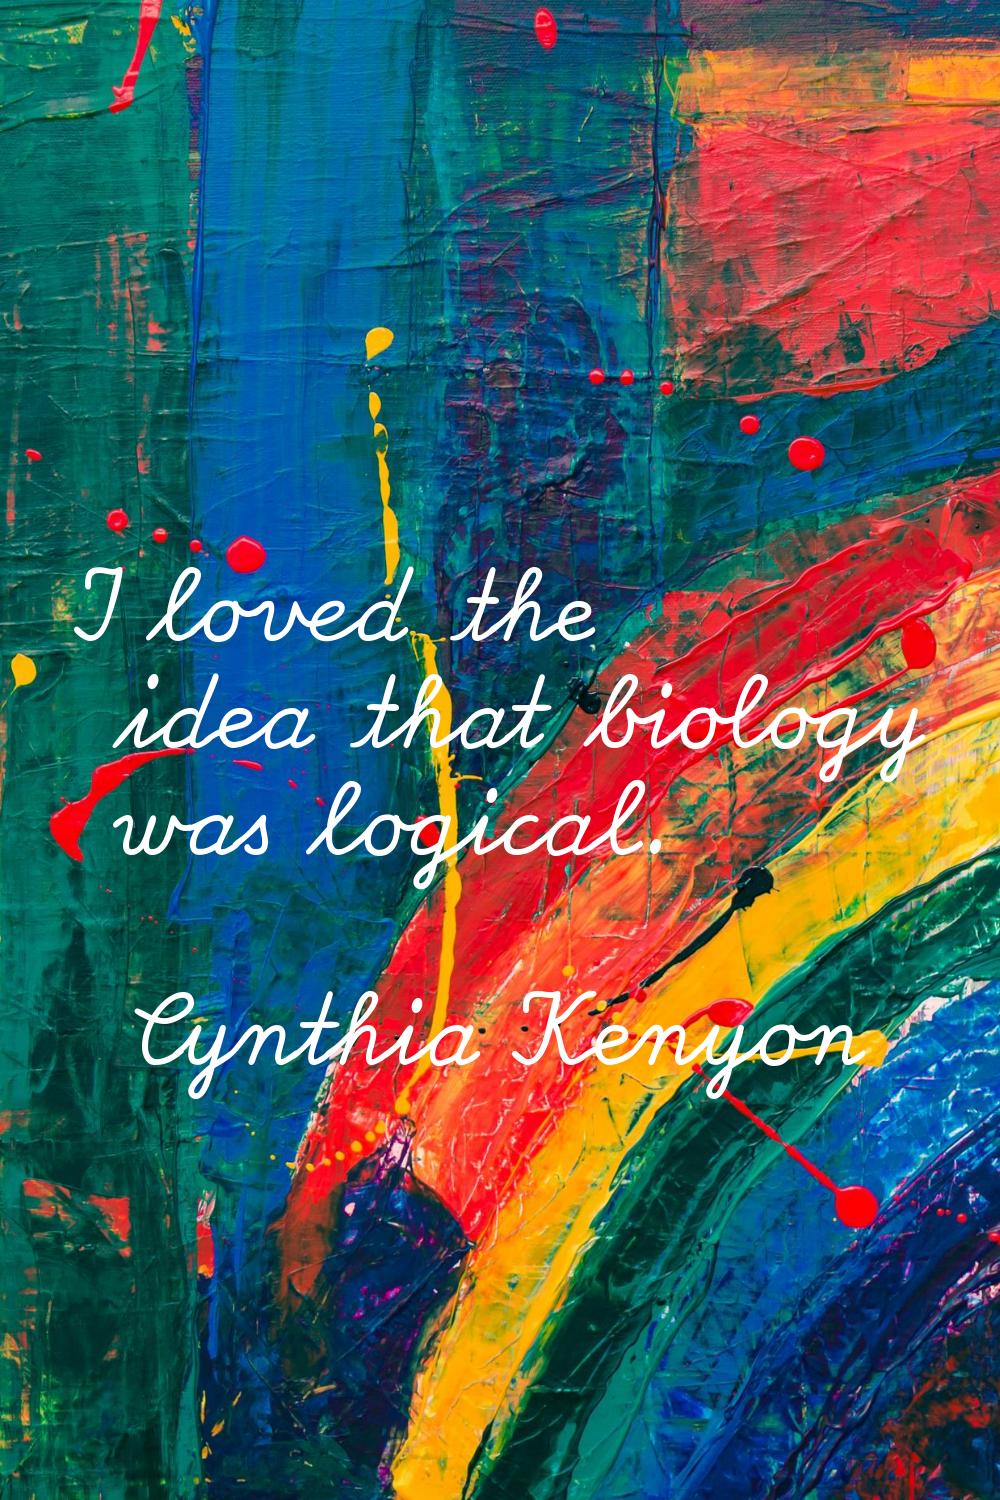 I loved the idea that biology was logical.